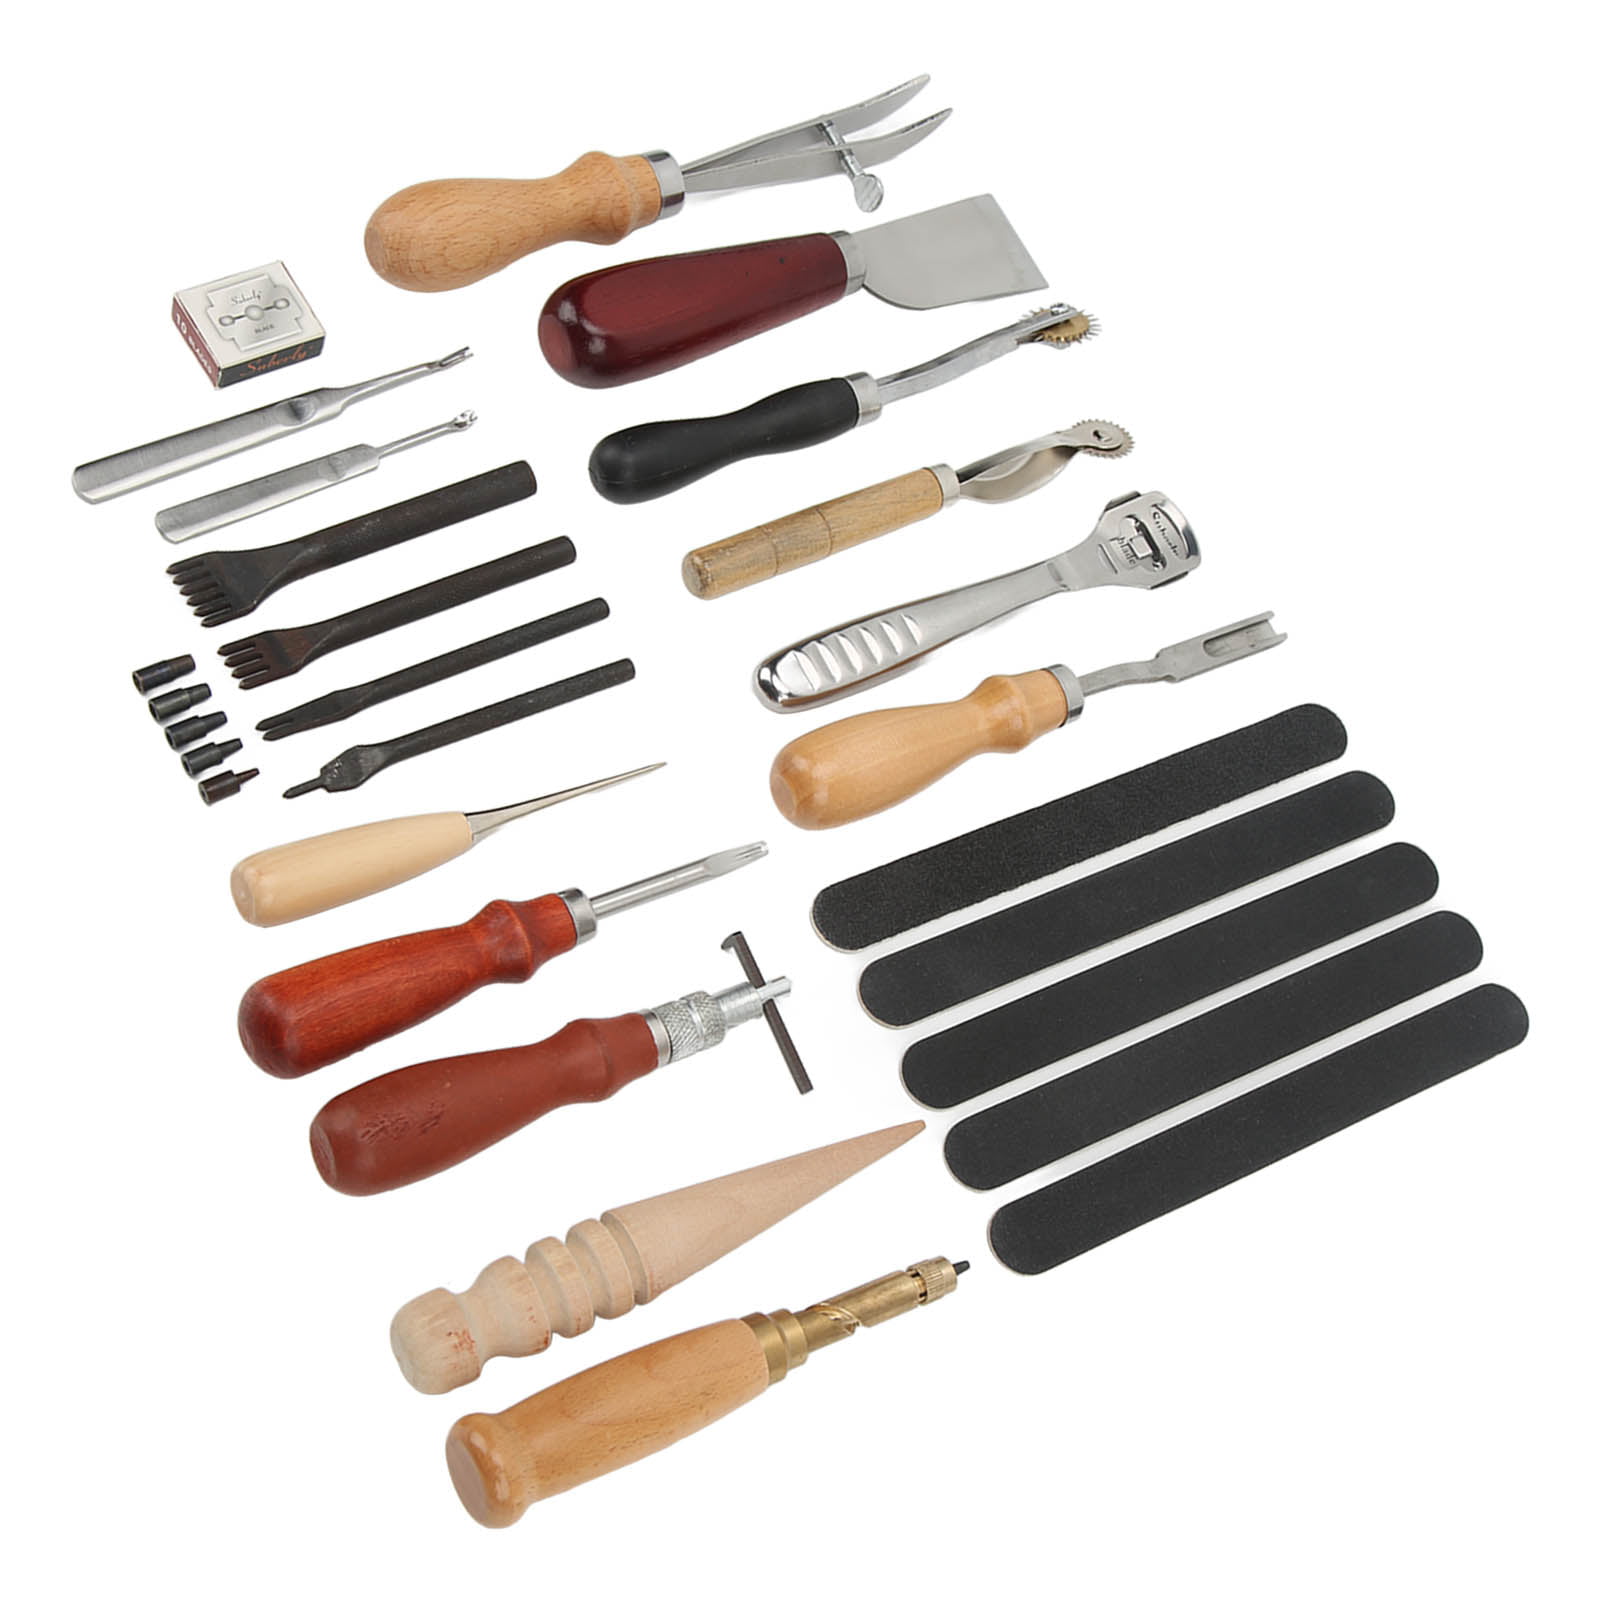 leather kit tools Purchase Price + User Guide - Arad Branding